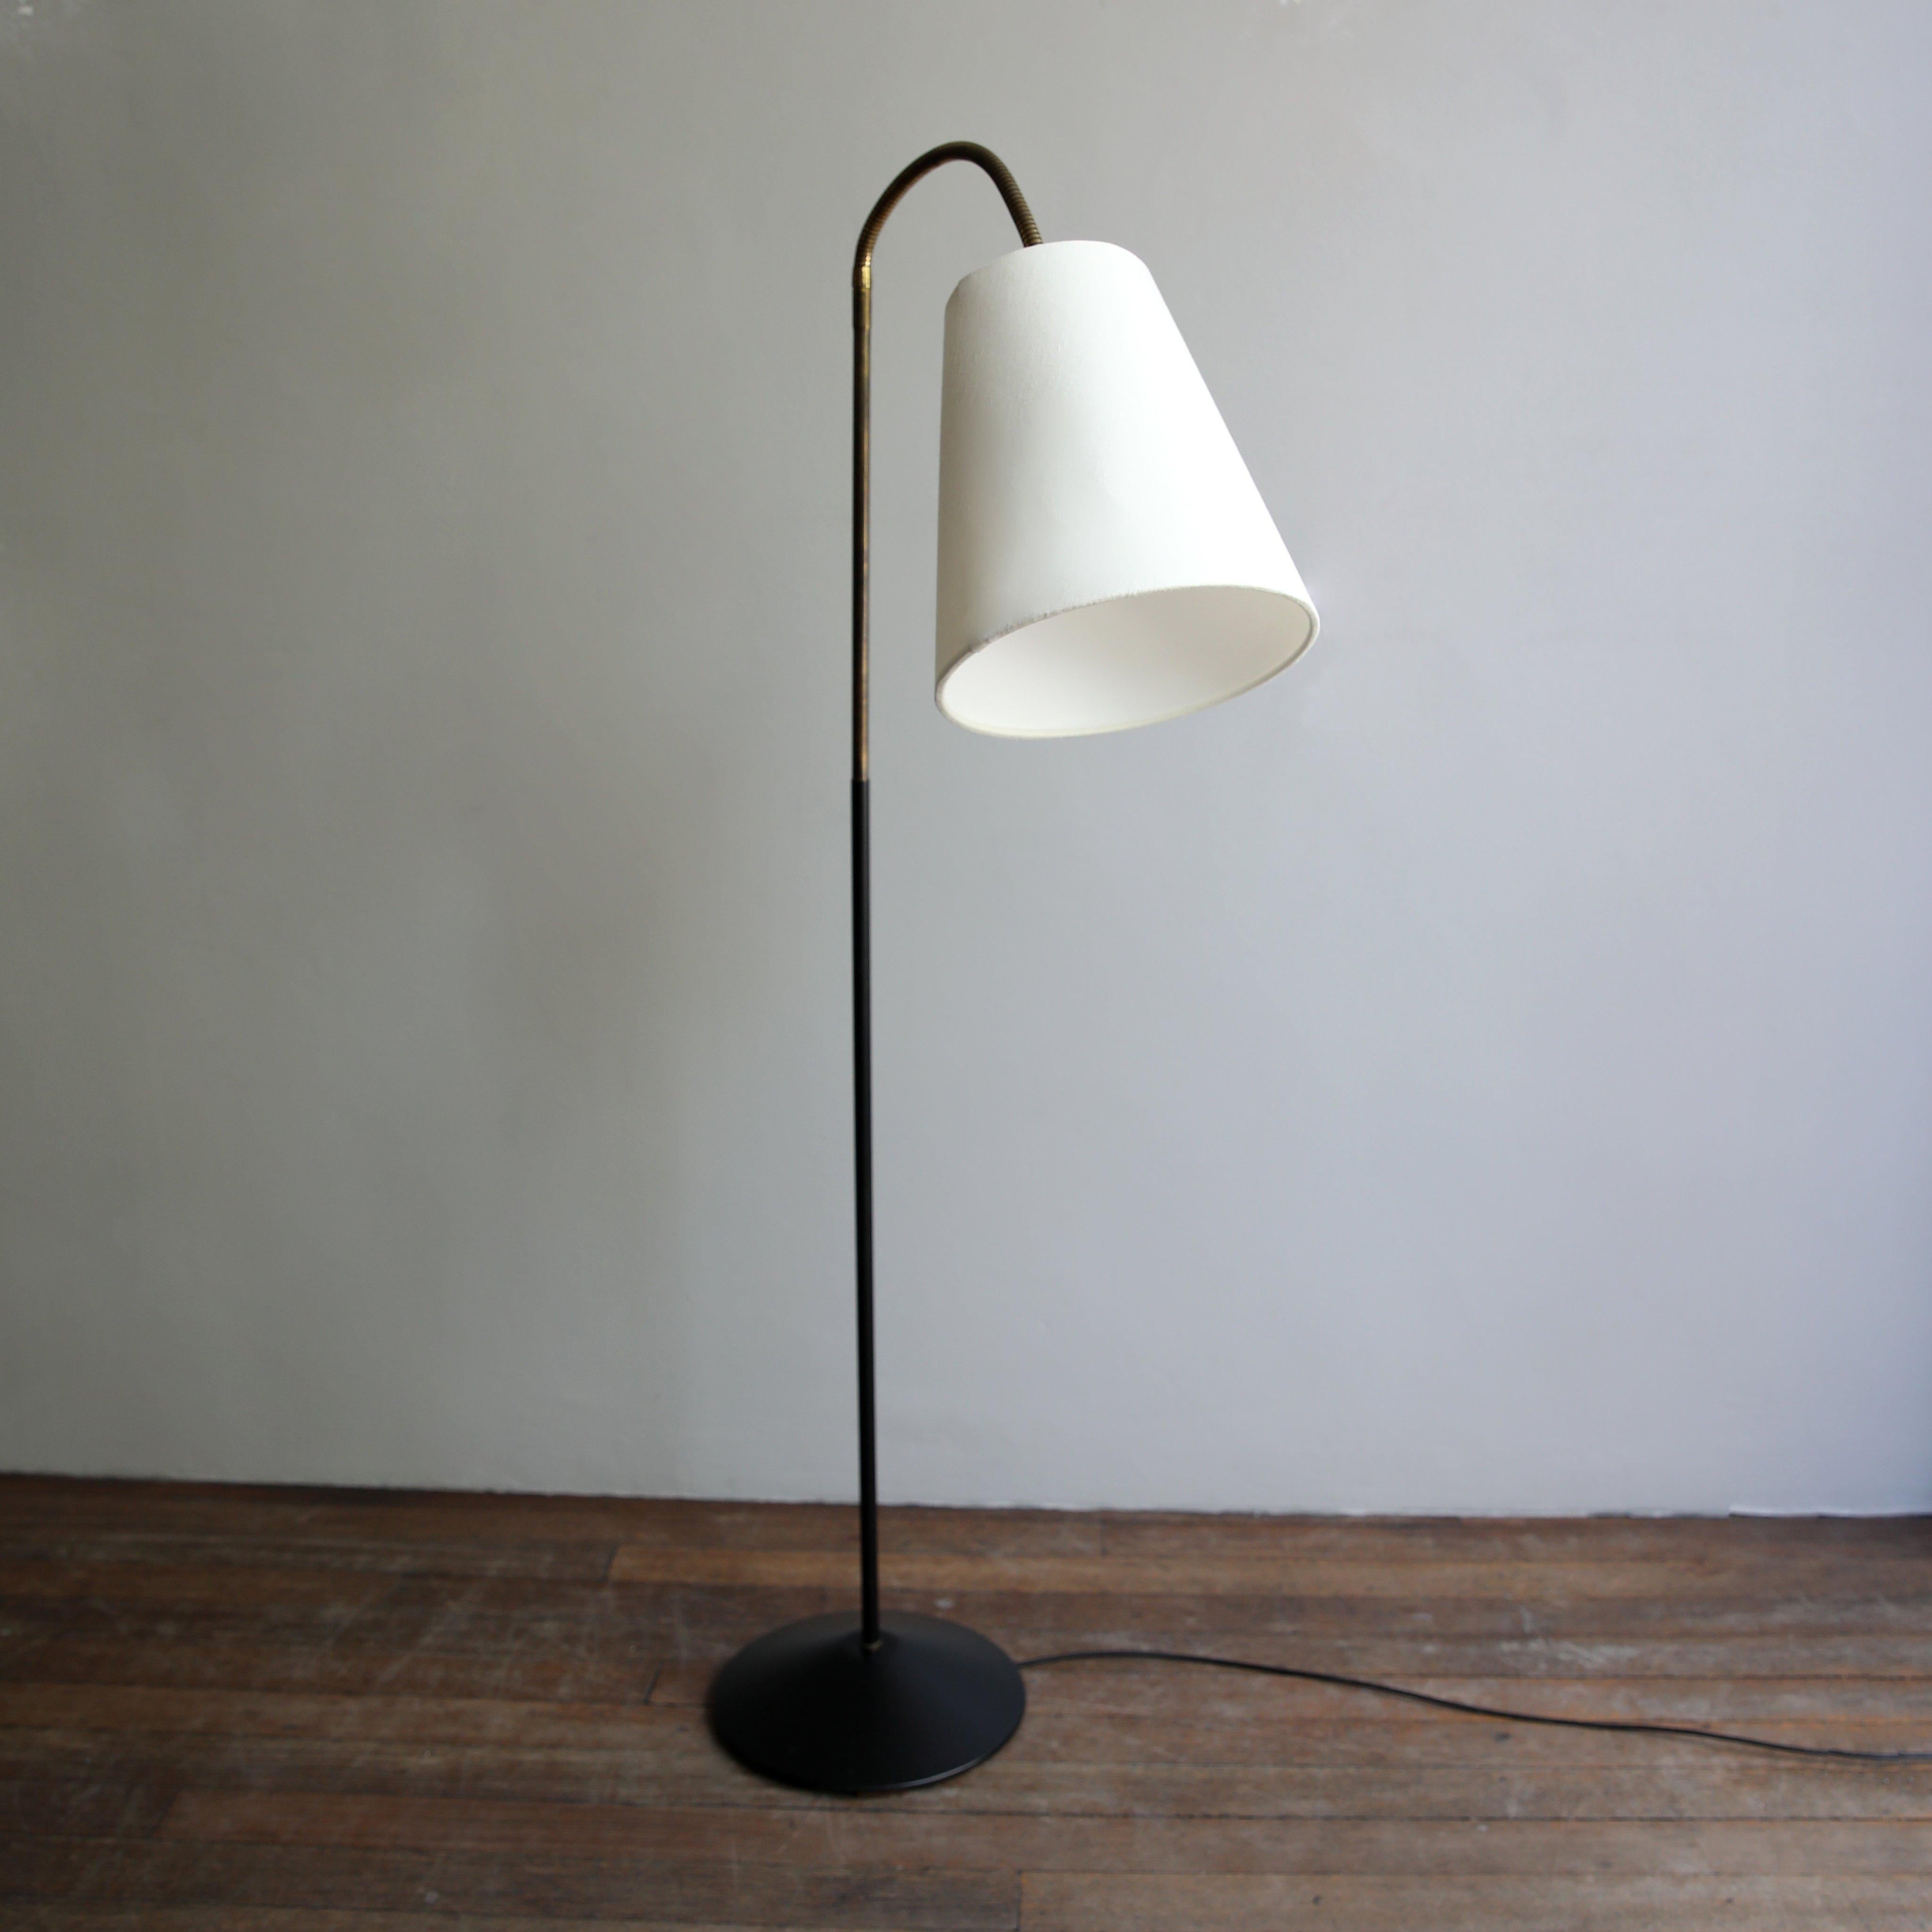 A floor lamp designed in the late-1950s by GA Scott for Maclamp, UK.
The lower half of the light’s stem and conical base are black lacquered aluminium.
Raising from the black stem is a short pole section of brass which leads into a brass gooseneck